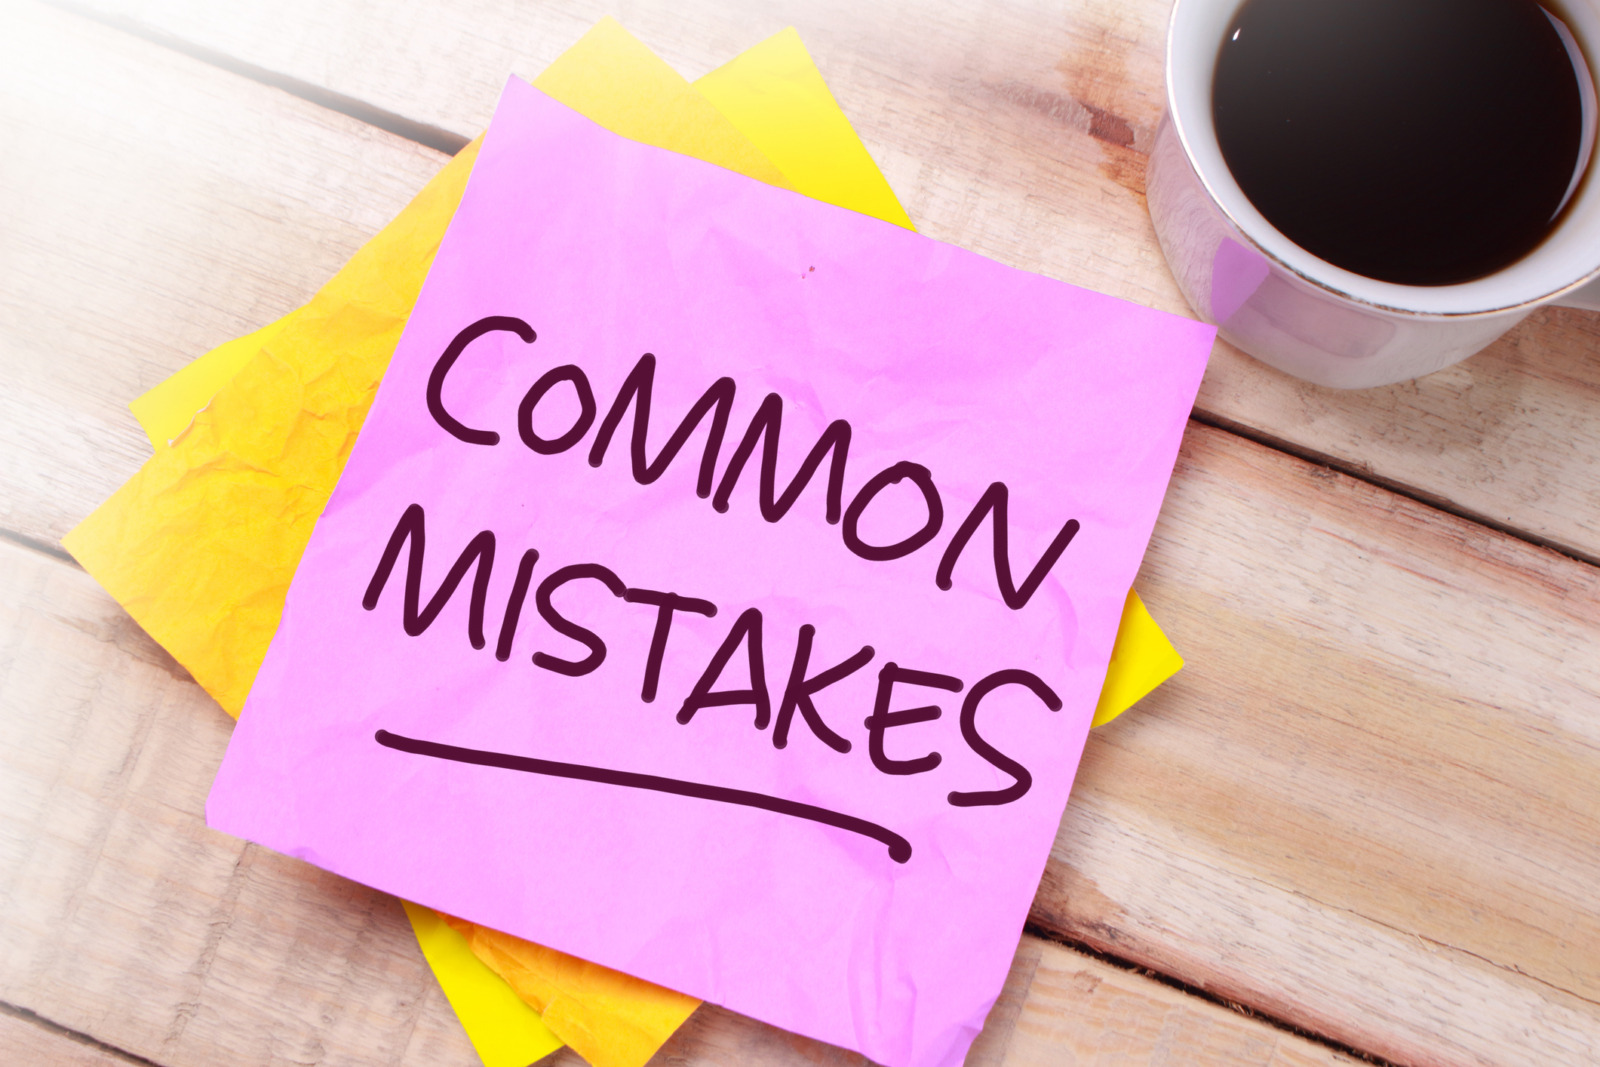 5 Mistakes New HR Departments Should Avoid